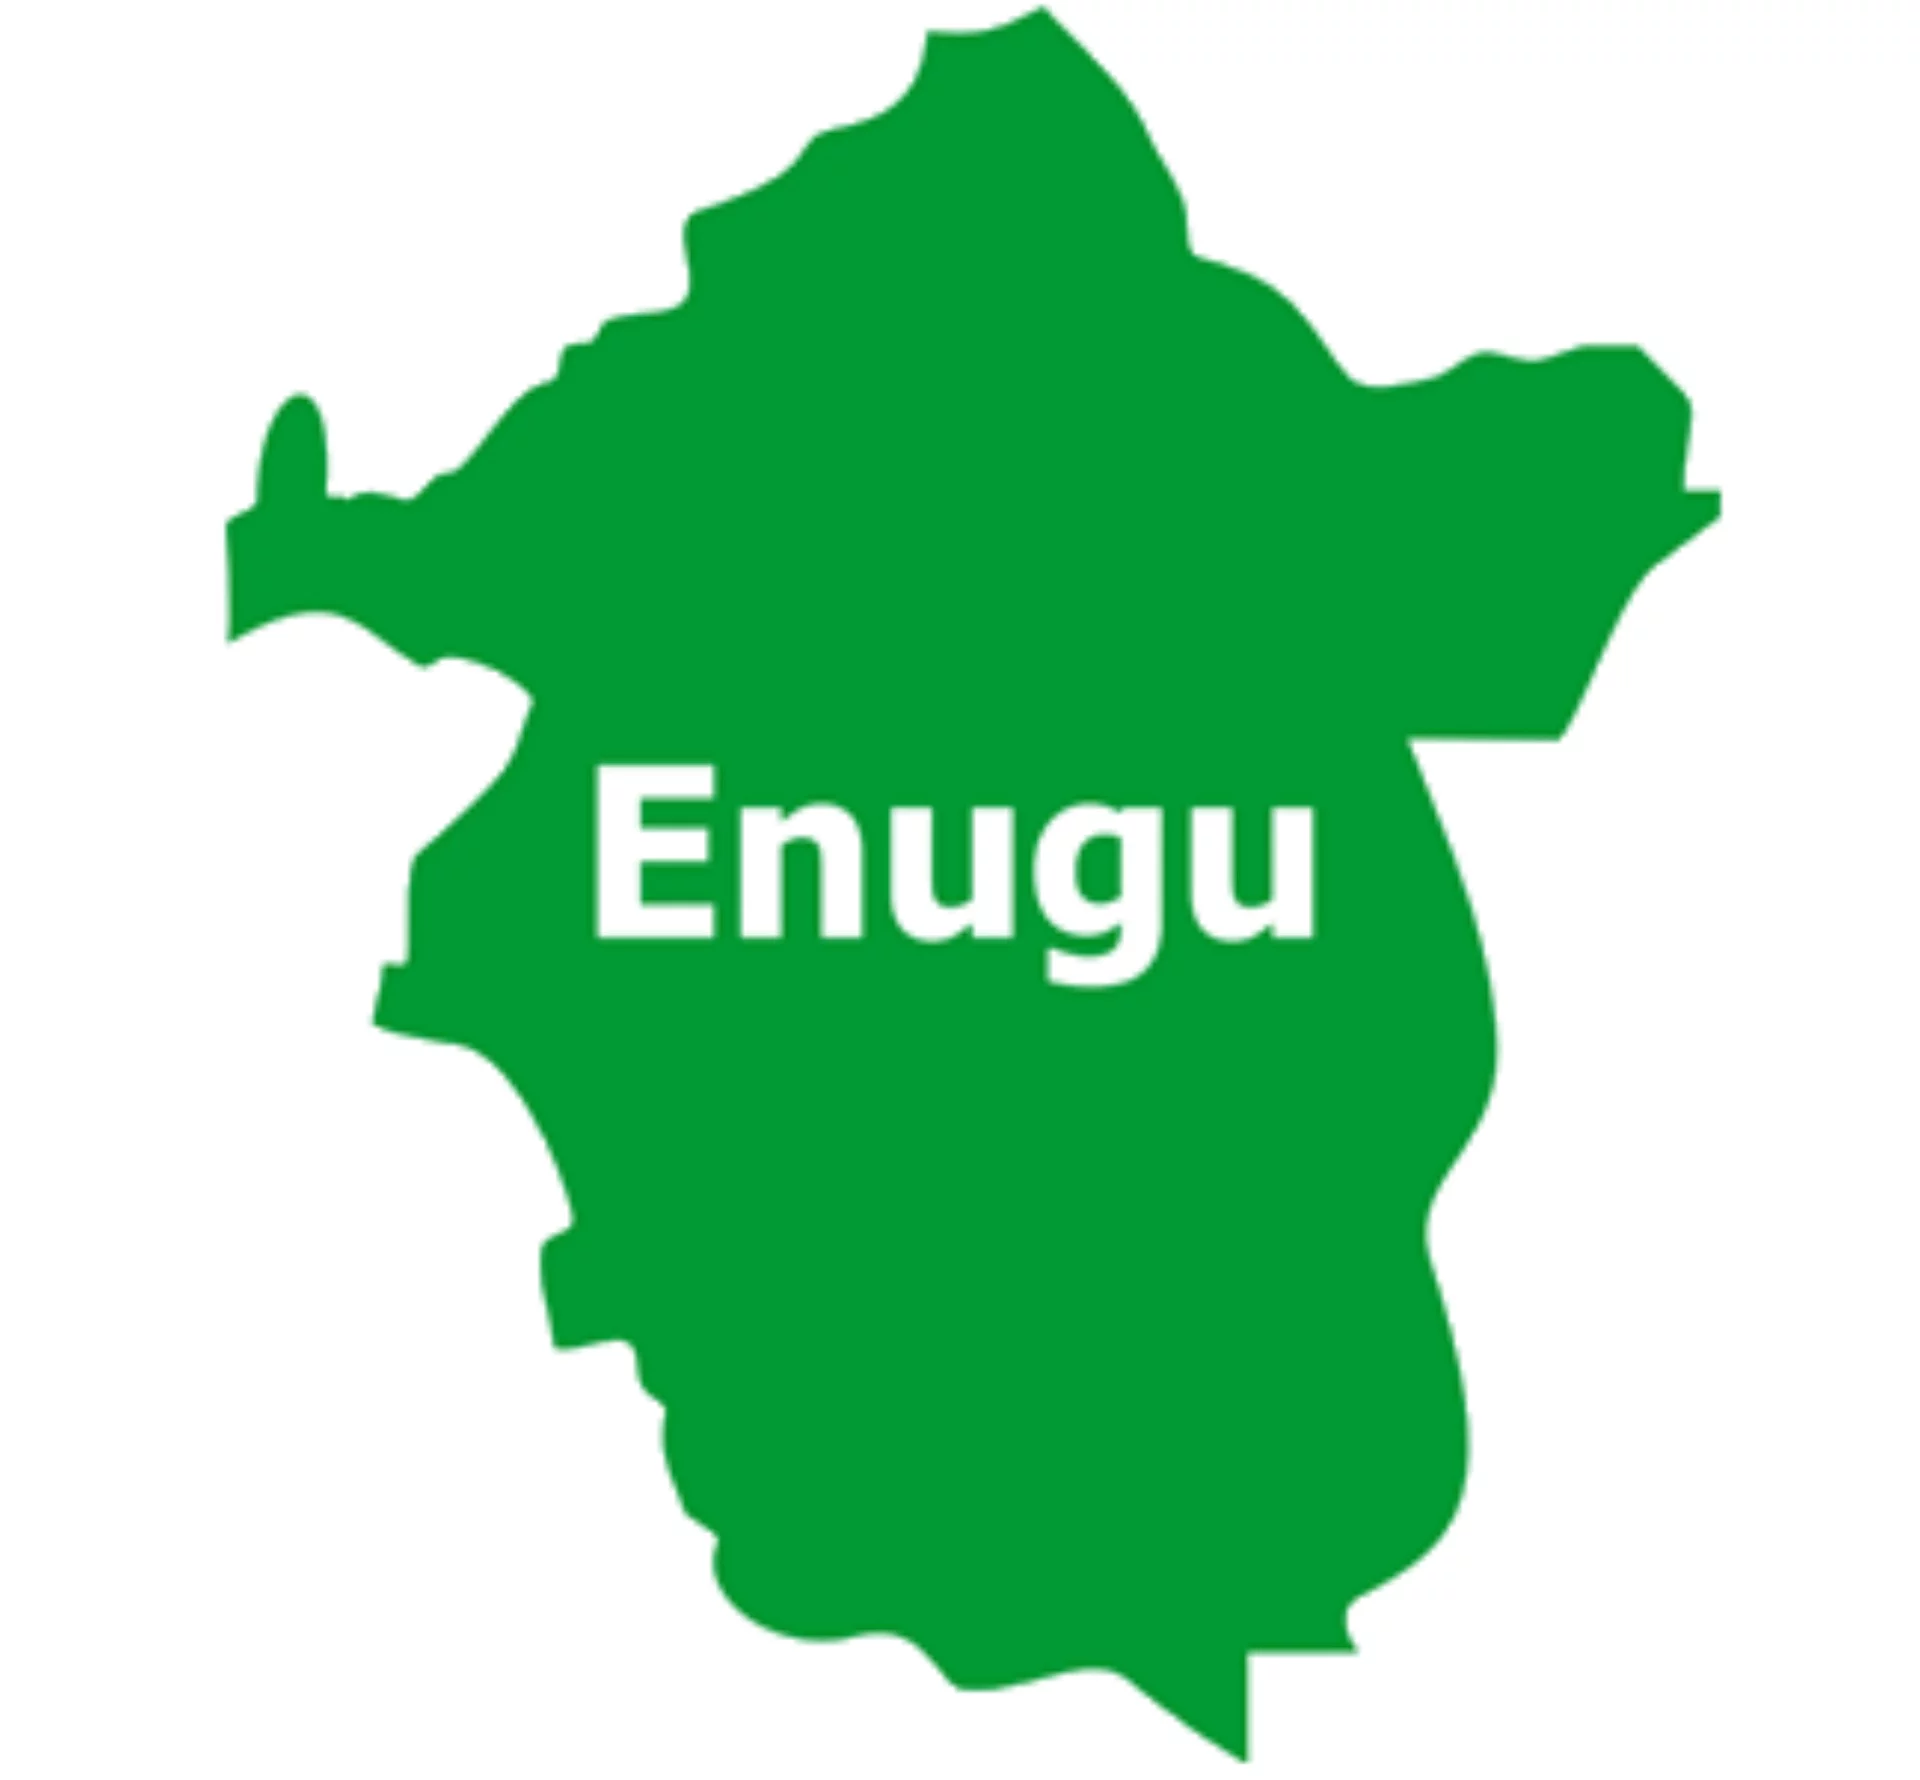 Political apathy: Group launches action in Enugu community